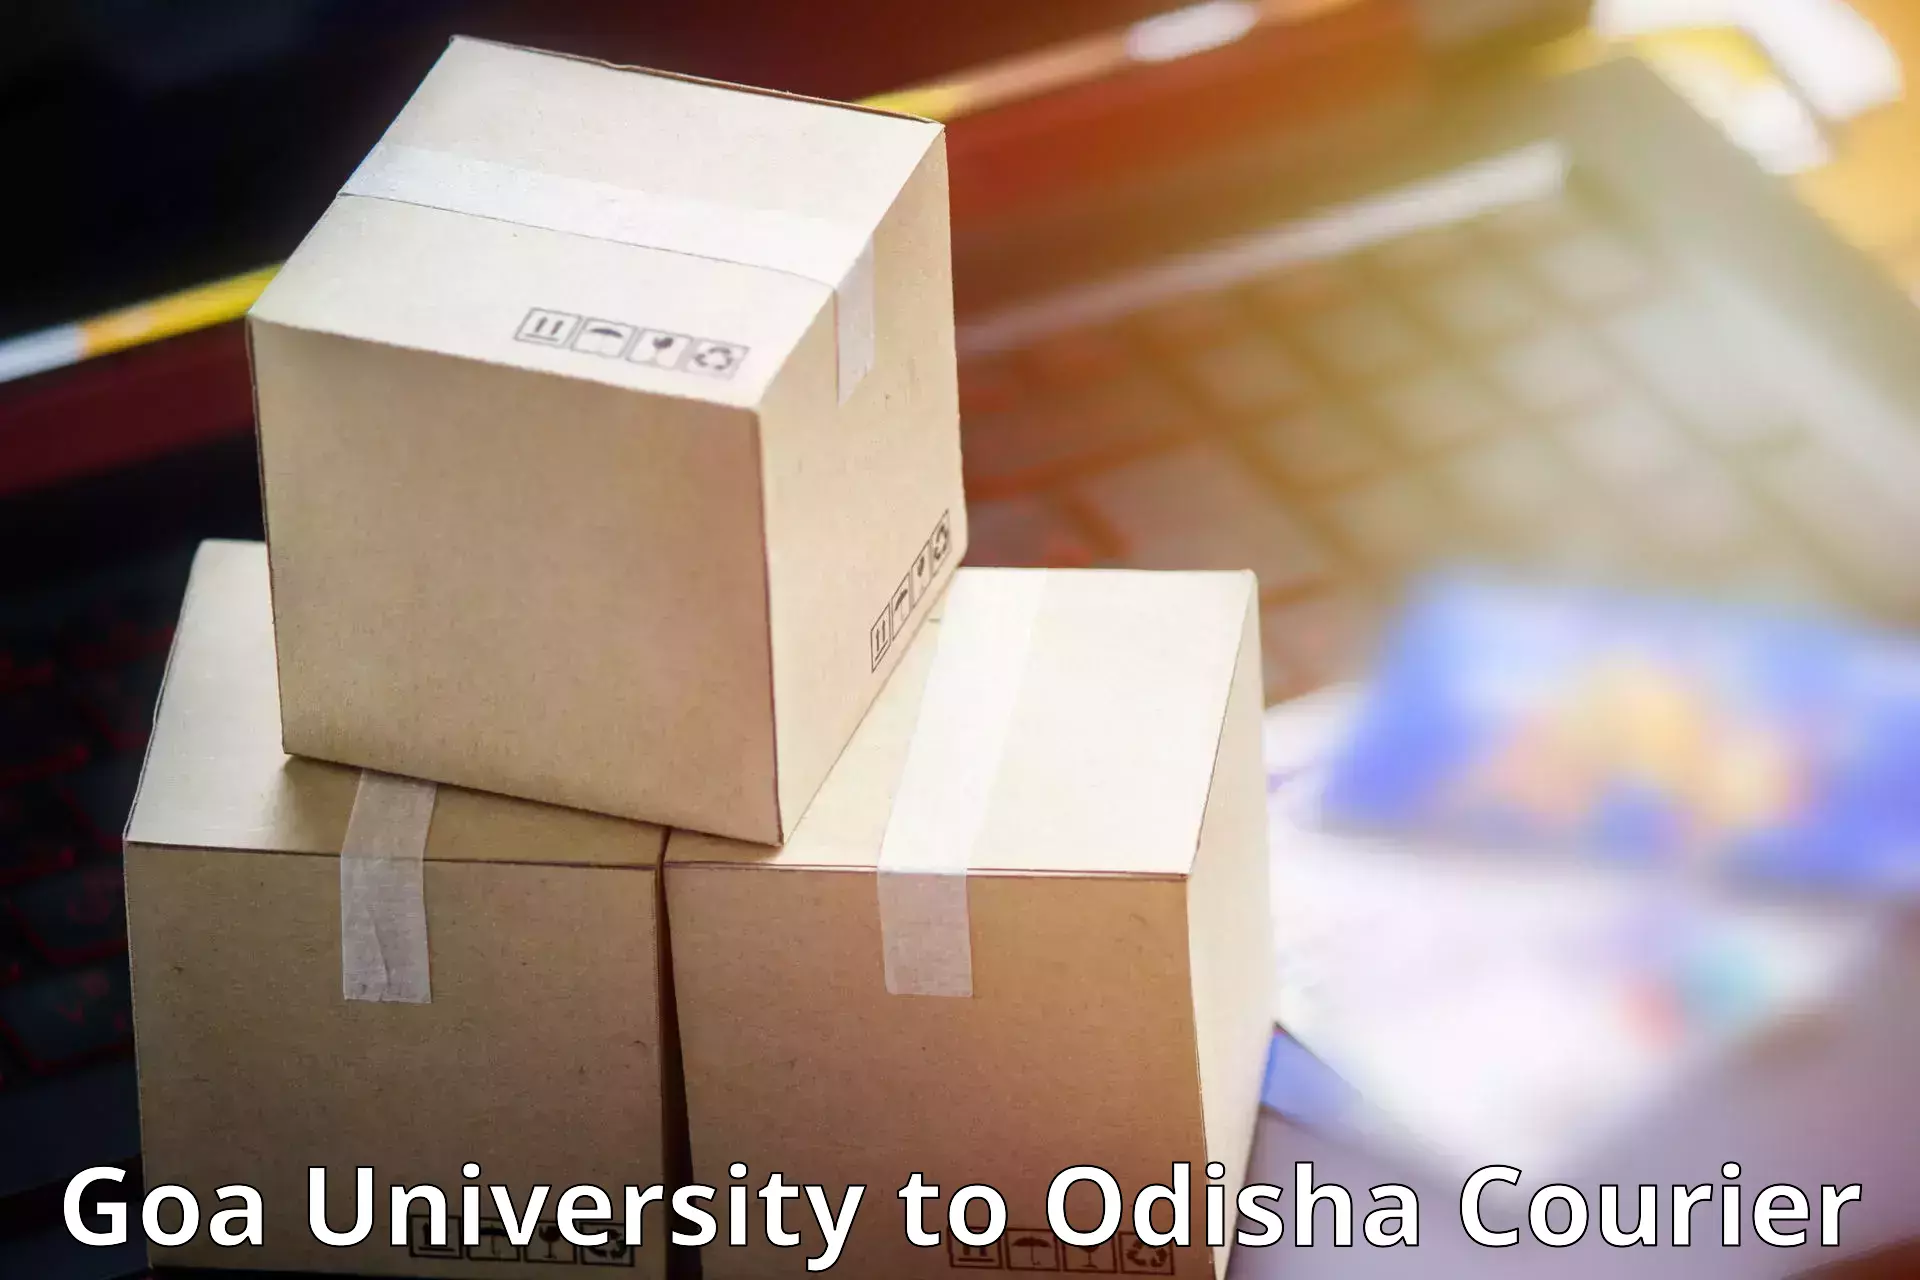 Postal and courier services Goa University to Dhamanagar